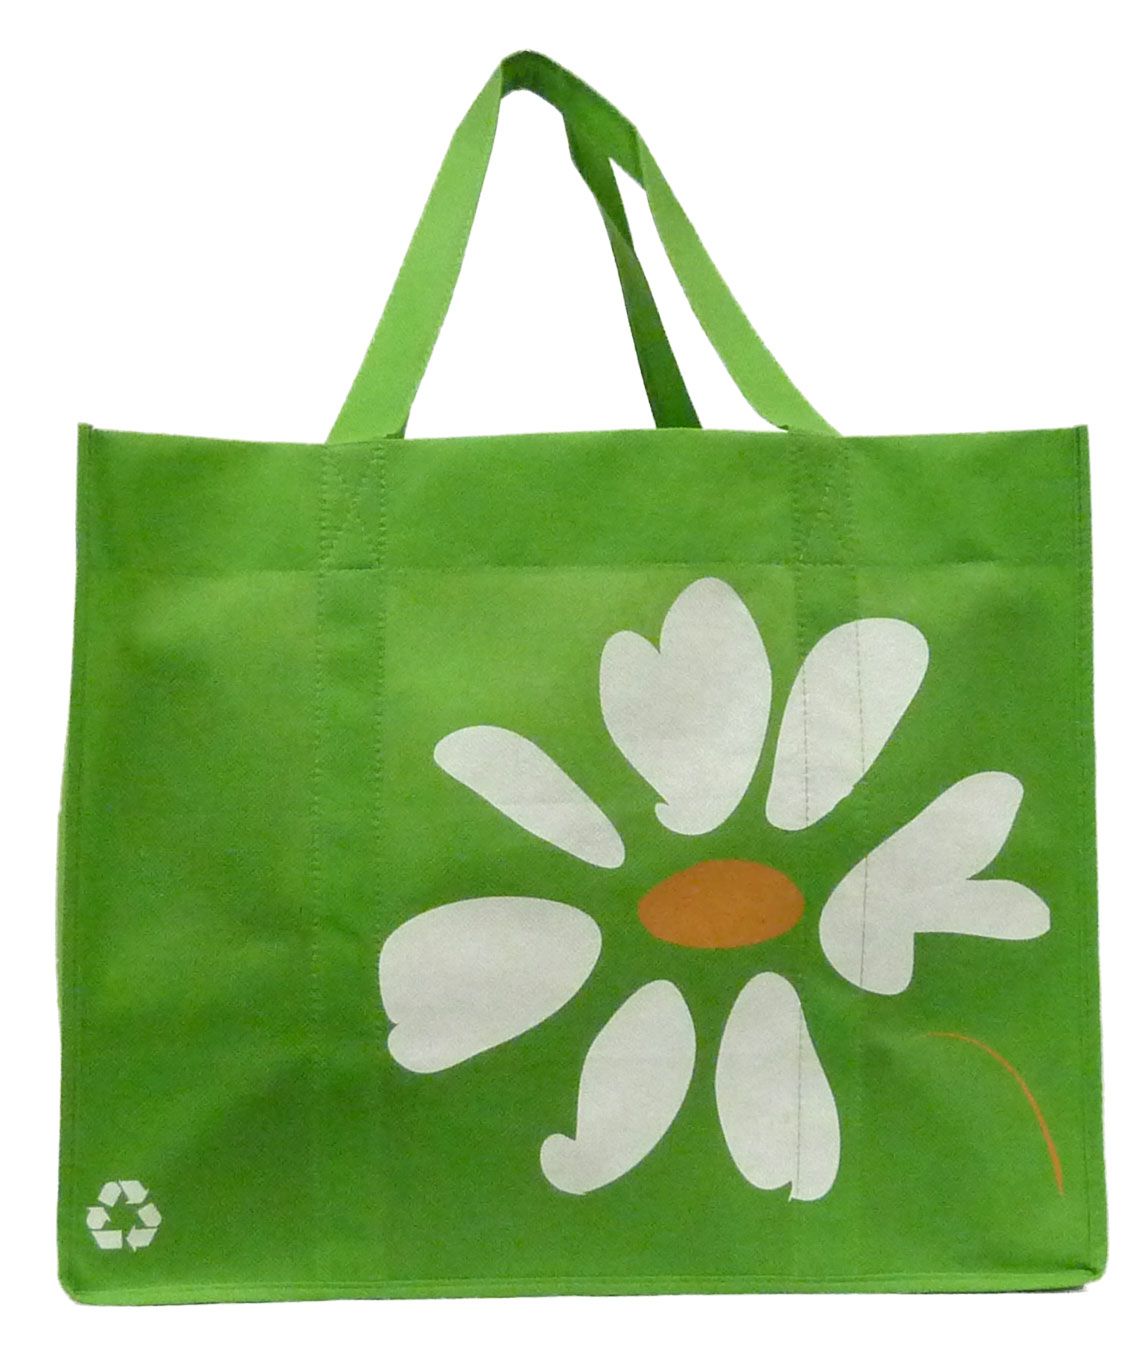 Earthwise Reusable Bag  Large Daisy